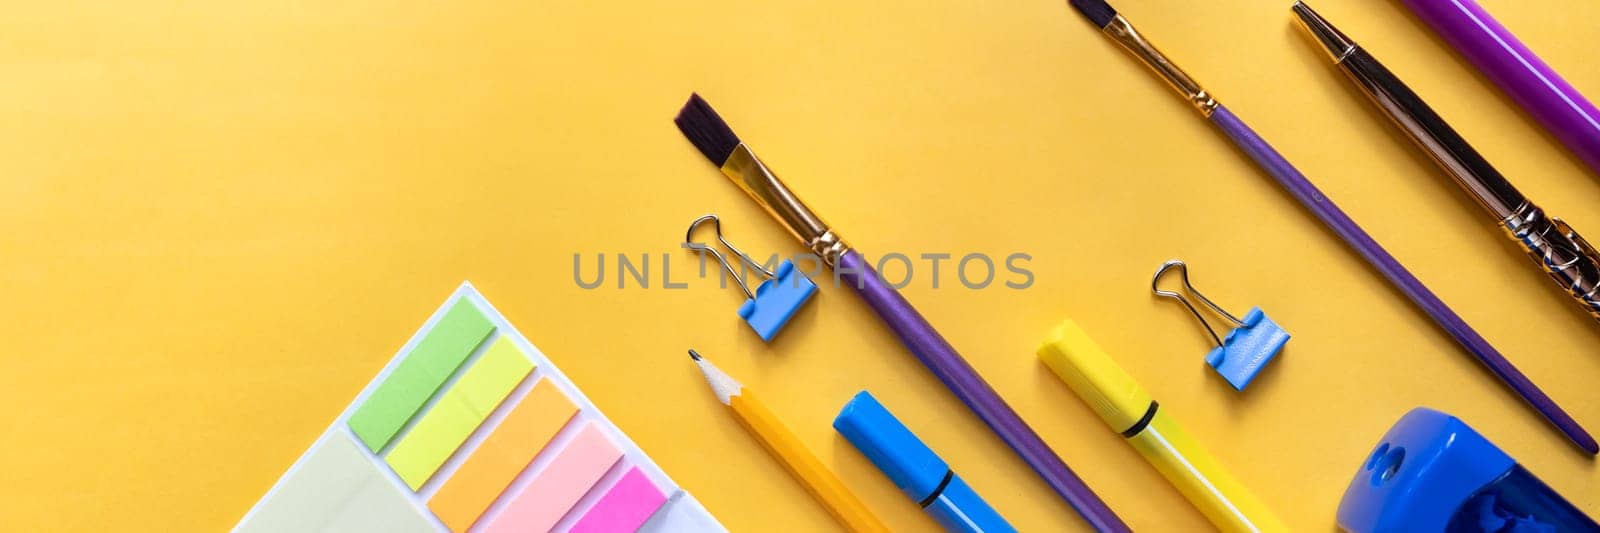 Frame from school and office supplies Paper clips, scissors, pens, felt-tip pens, sharpener, isolated on yellow background. Flat lay.Back to school, education concept.Teacher's Day. by YuliaYaspe1979